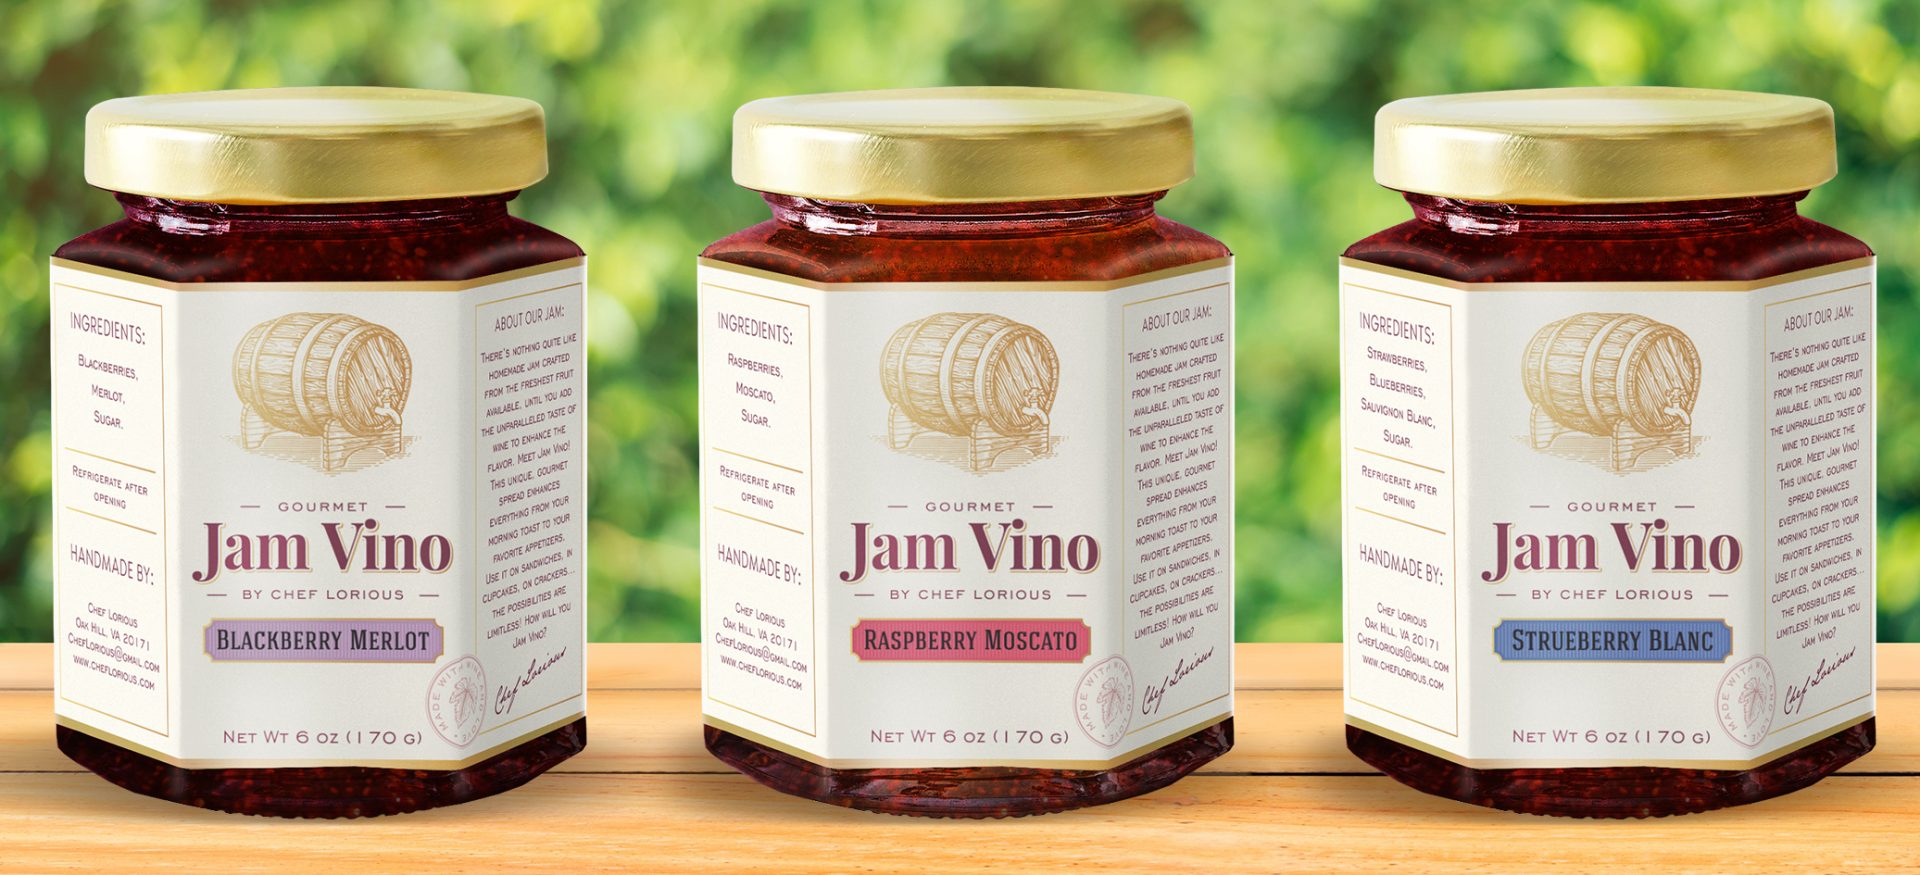 A jar of jam with the label " jam vino ".